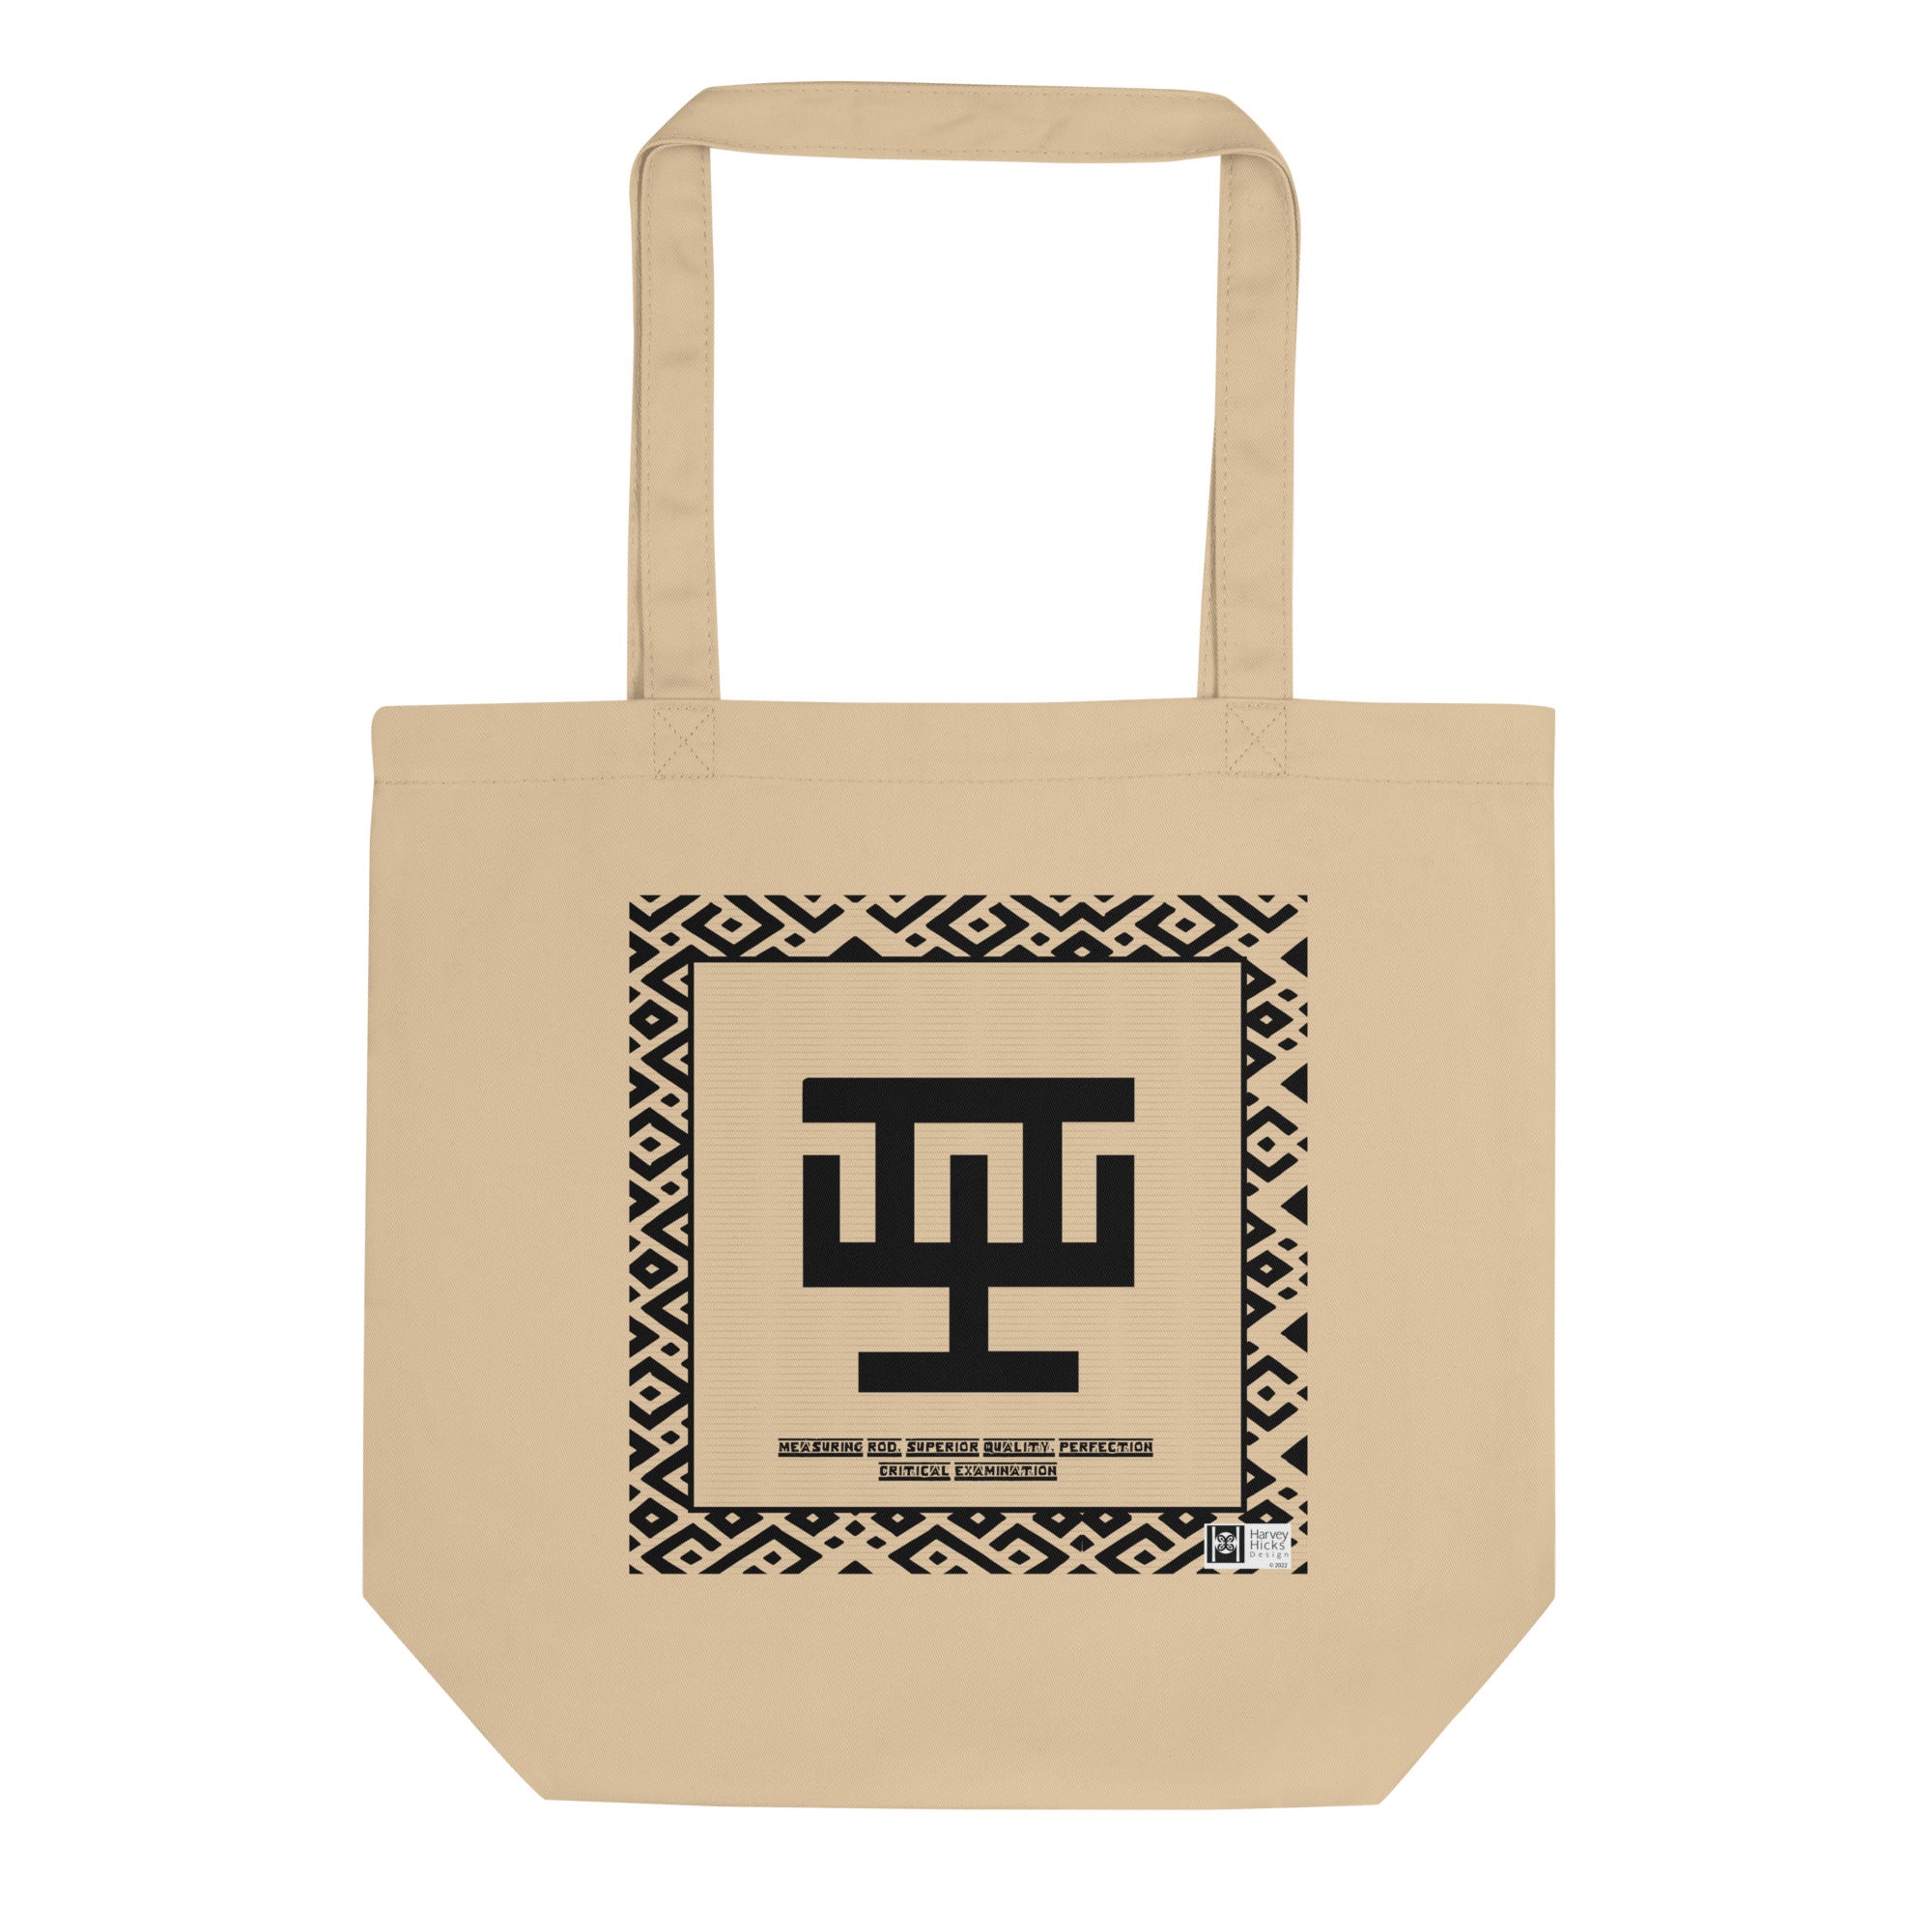 100% cotton Eco Tote Bag, featuring the Adinkra symbol for perfection